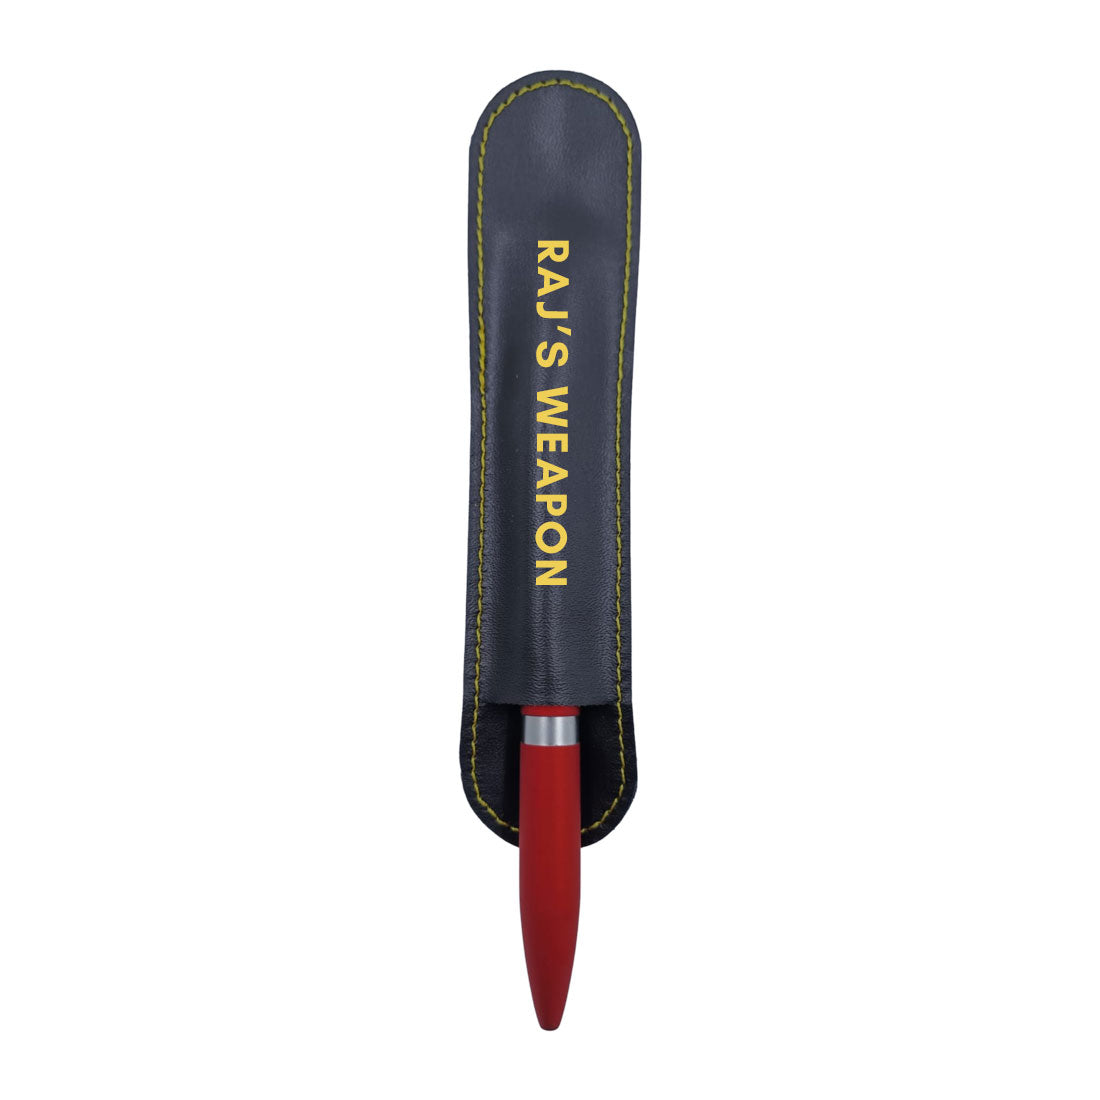 Engraved Personalised Pen Gift Set For Boss Office Colleagues (Red) - Add Name